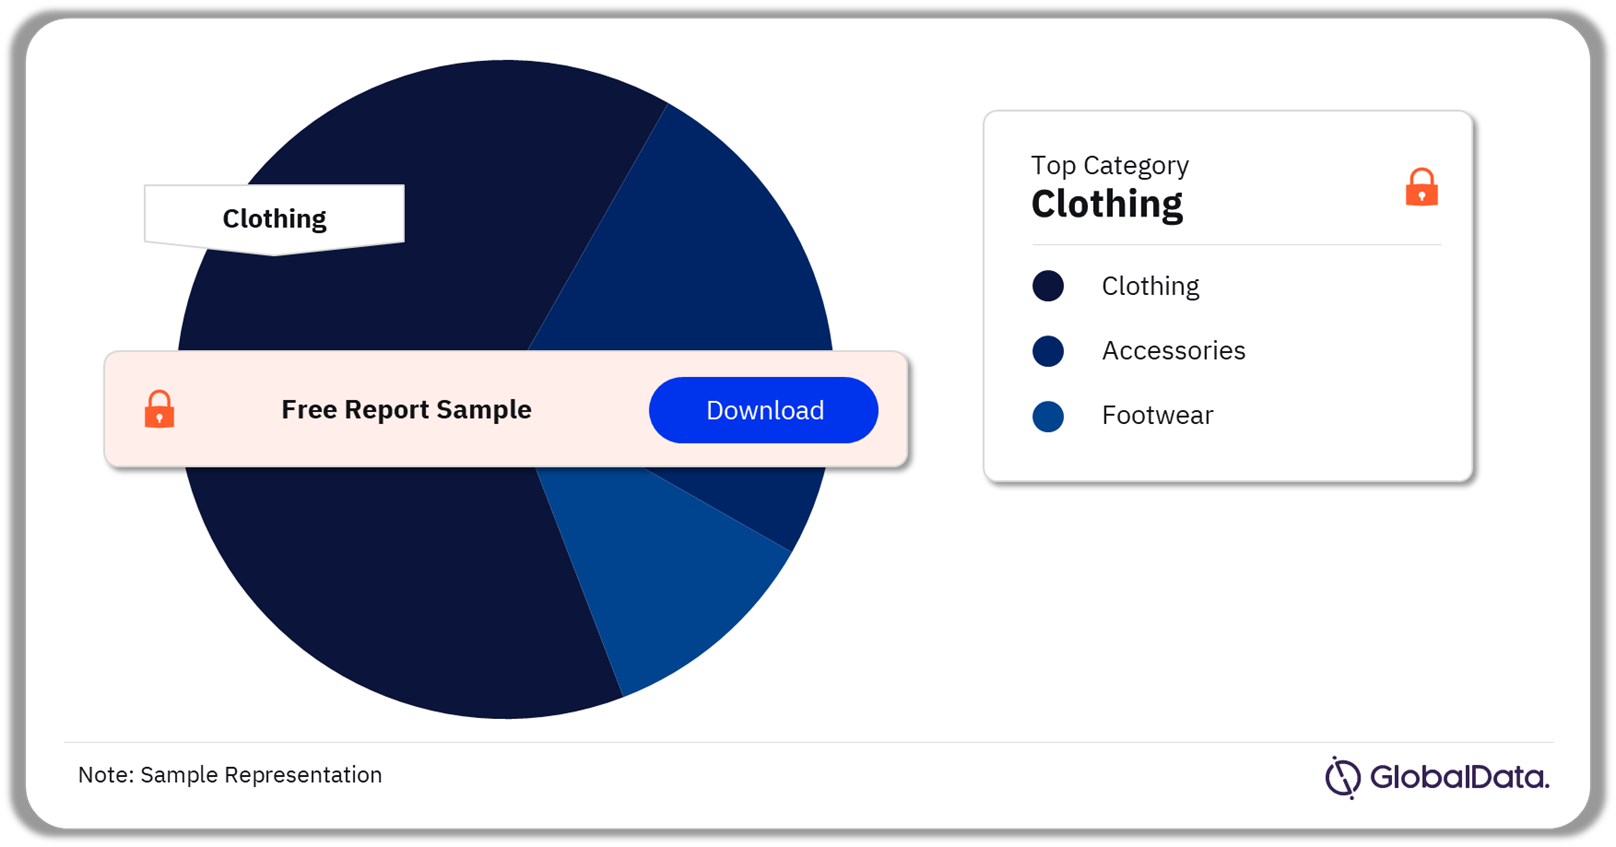 Online Apparel Market Analysis by Categories, 2022 (%)